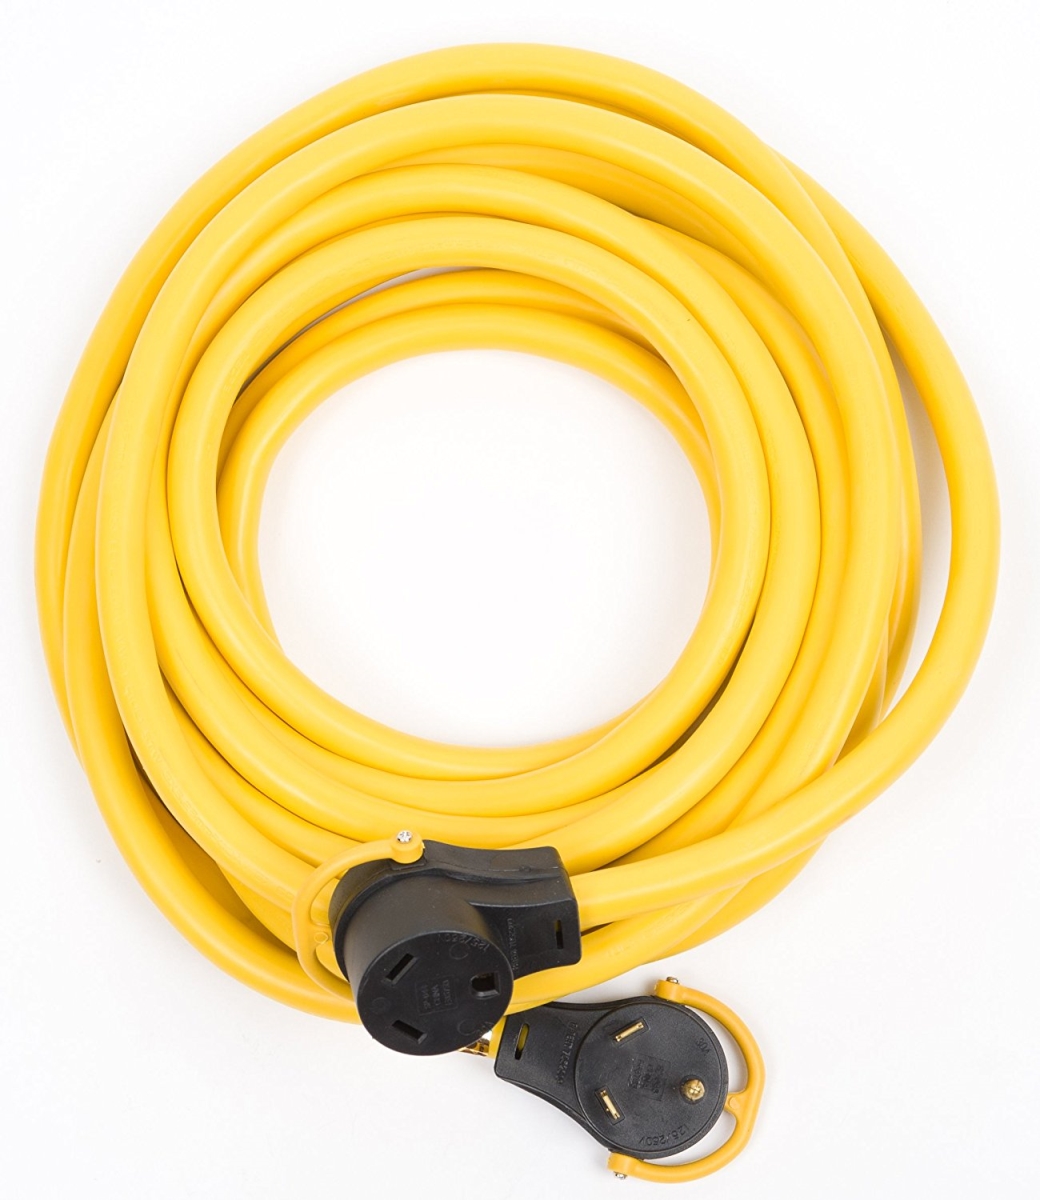 Picture of Arcon ARC-11533 25 ft. 30 A Extension Cord with Handle